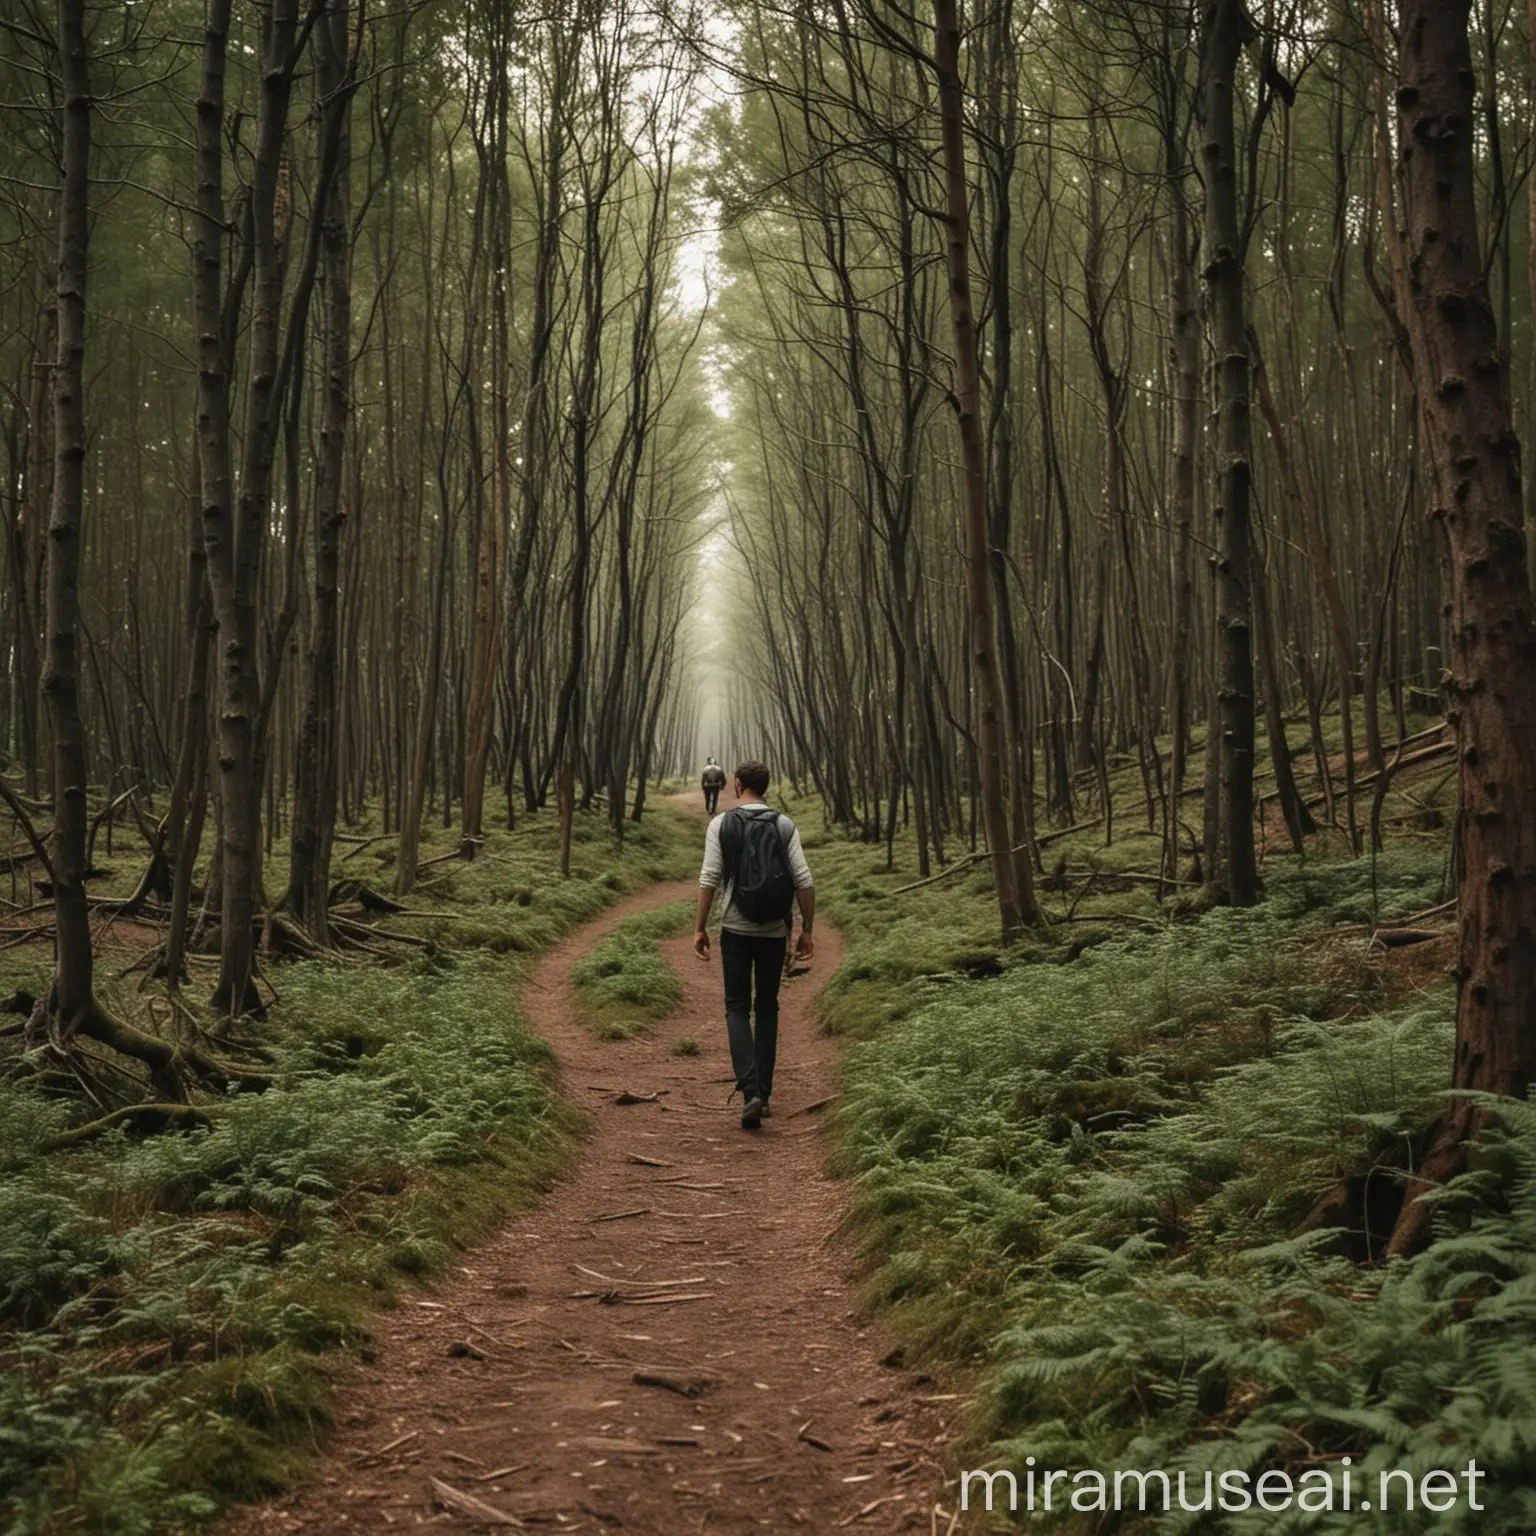 Solitary Man Strolling Amidst Lush Forest Canopy